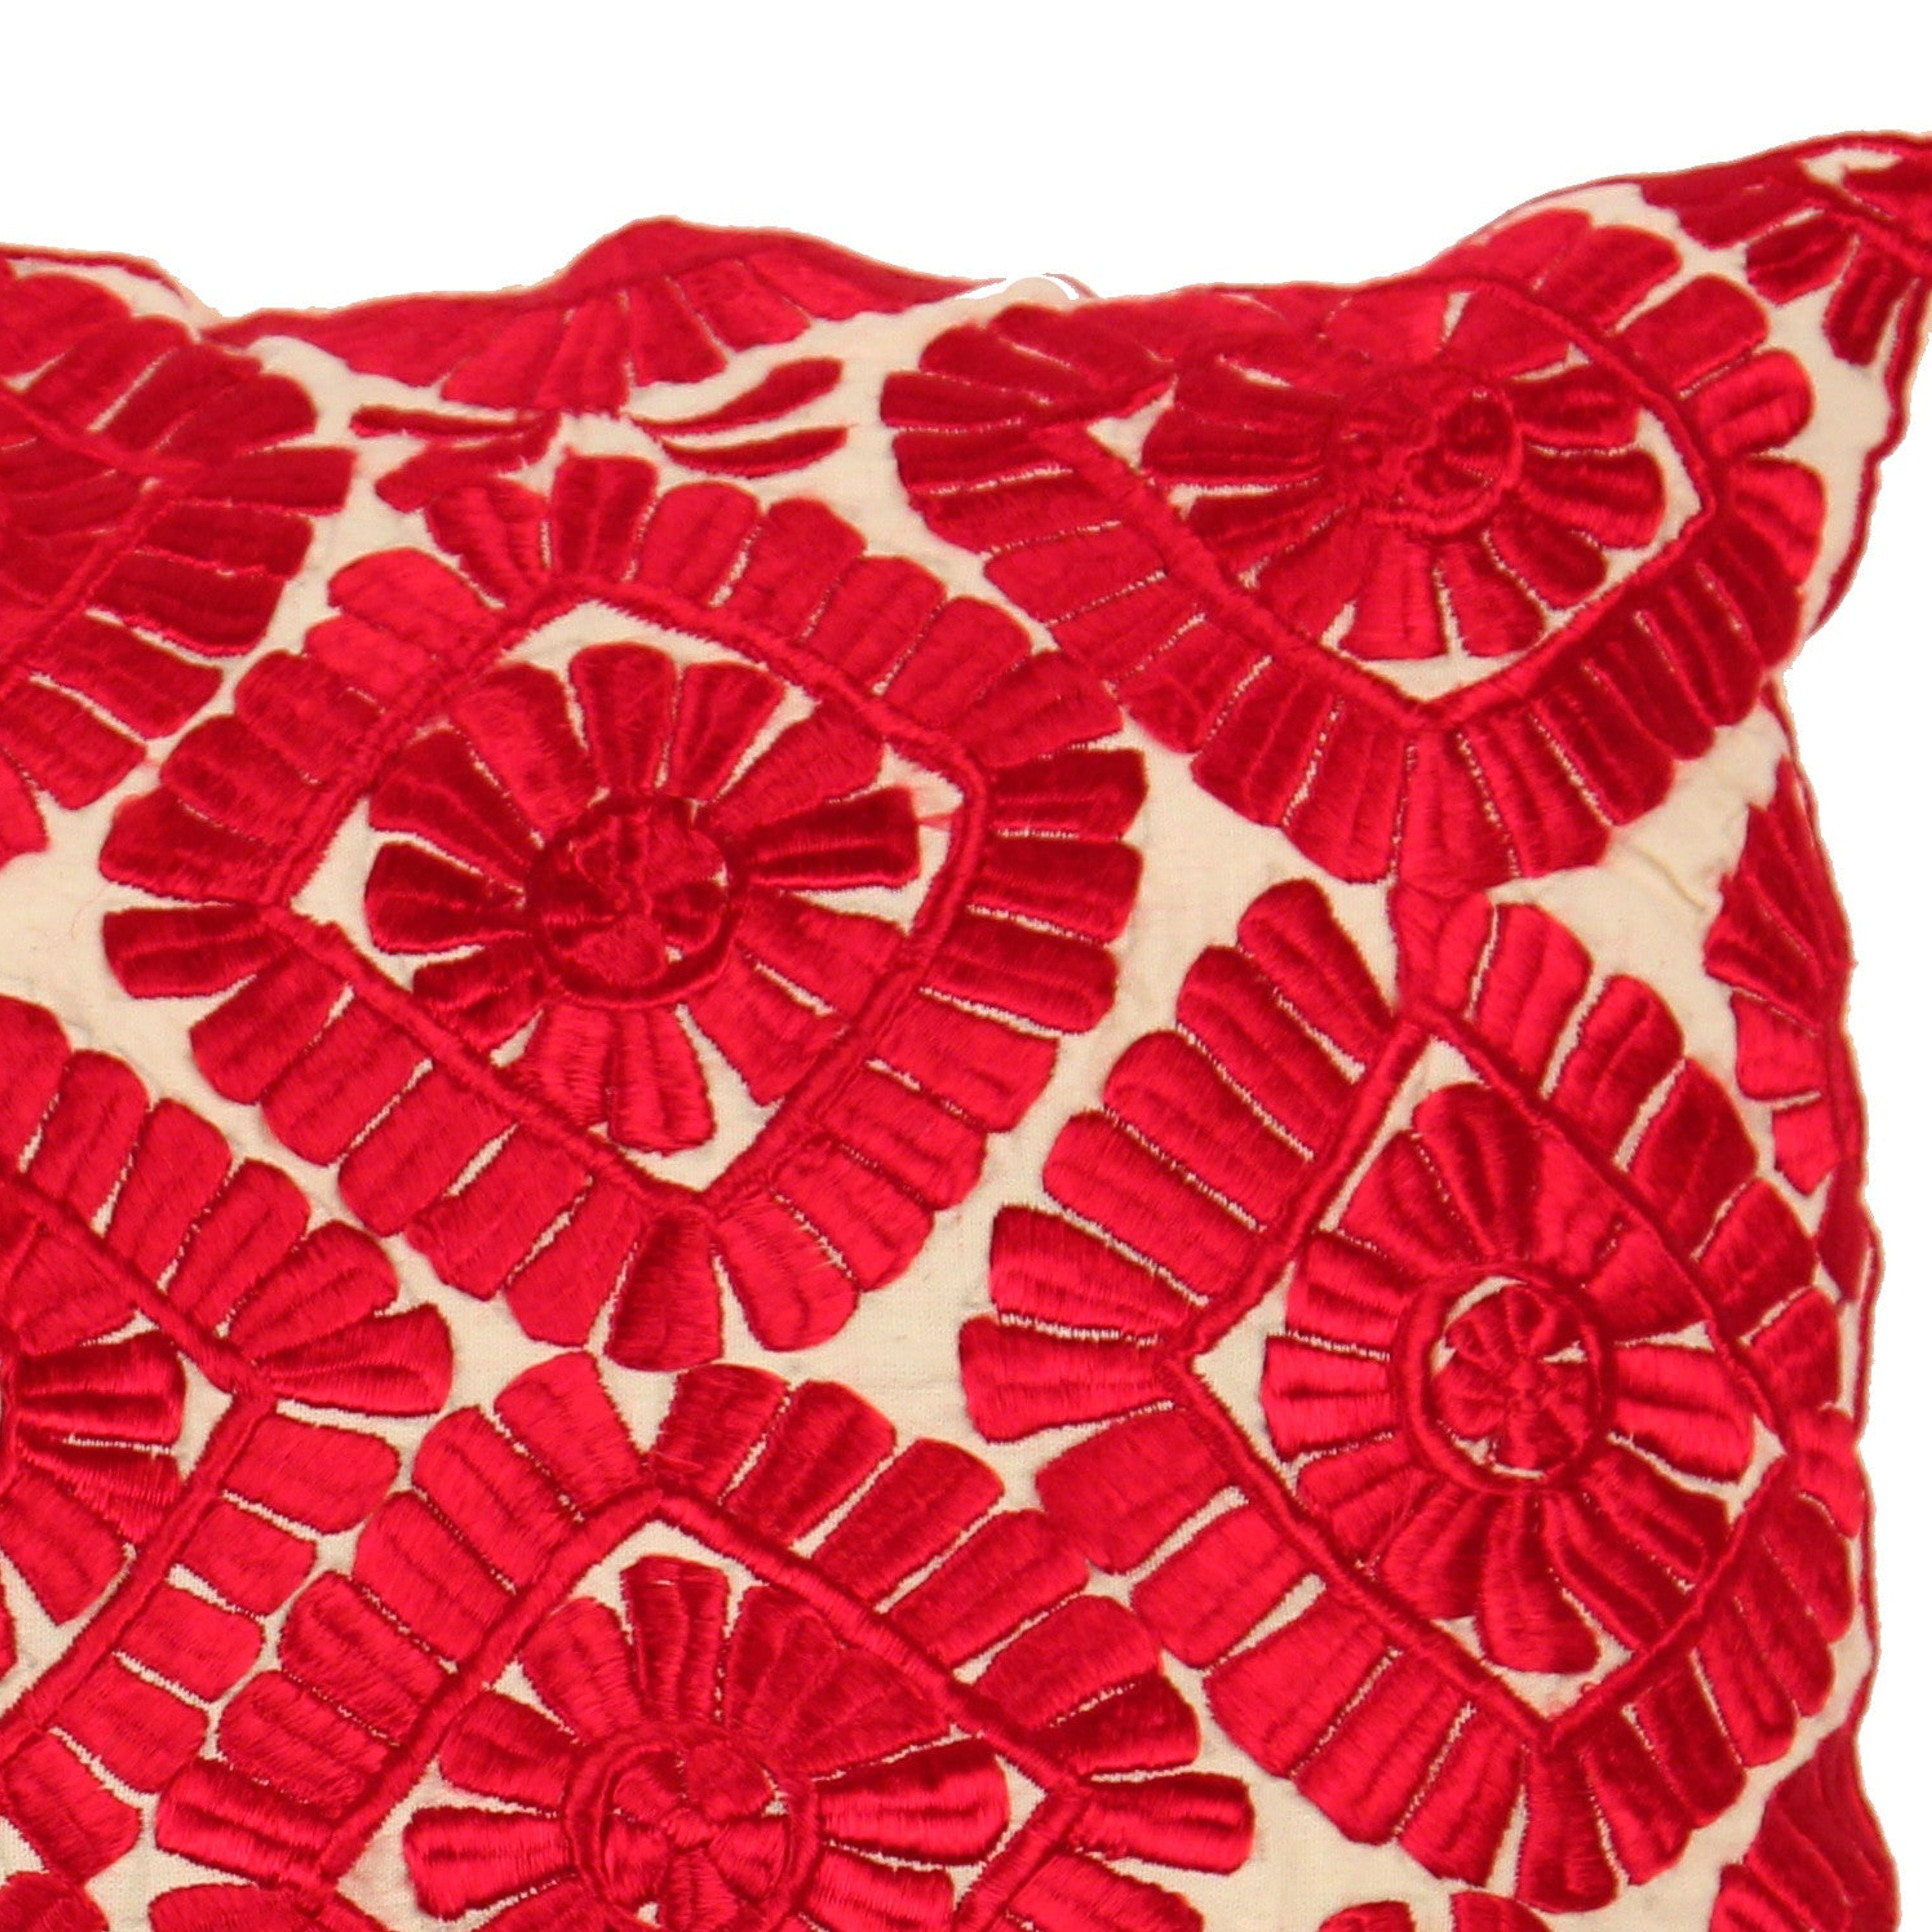 Moroccan Embroidered Pillow, Red